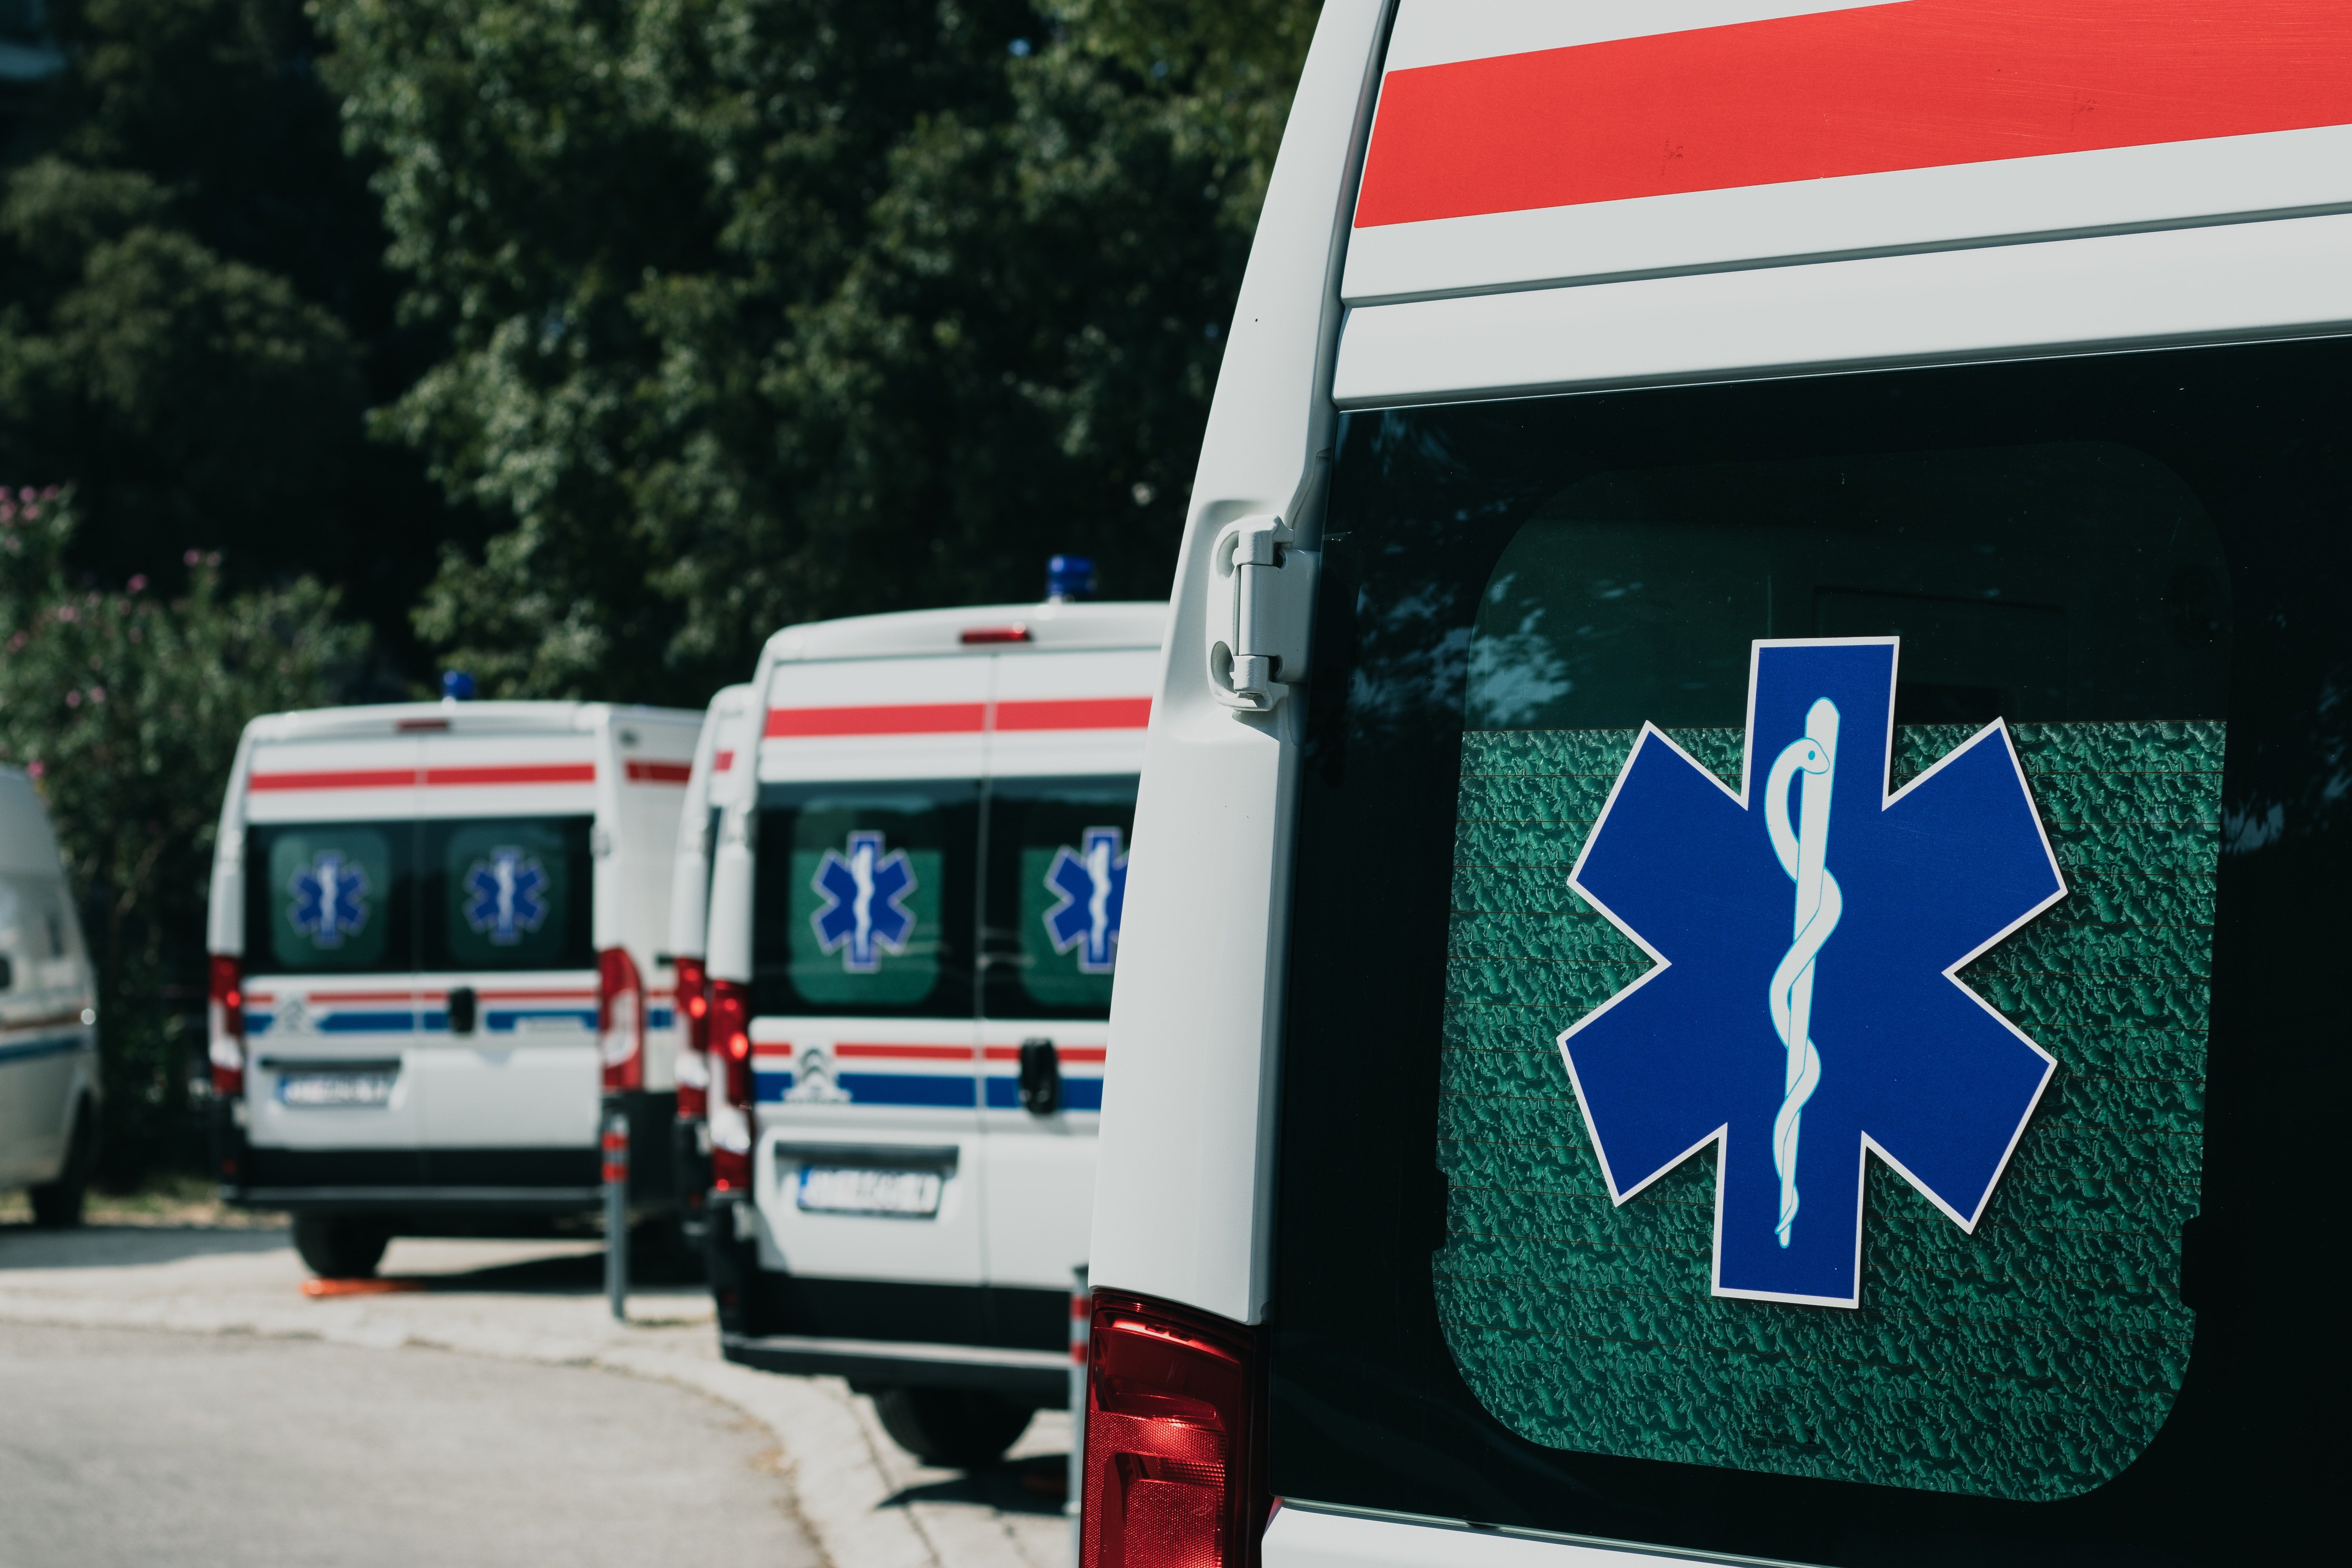 An ambulance parked in a parking lot | Photo: Pexels